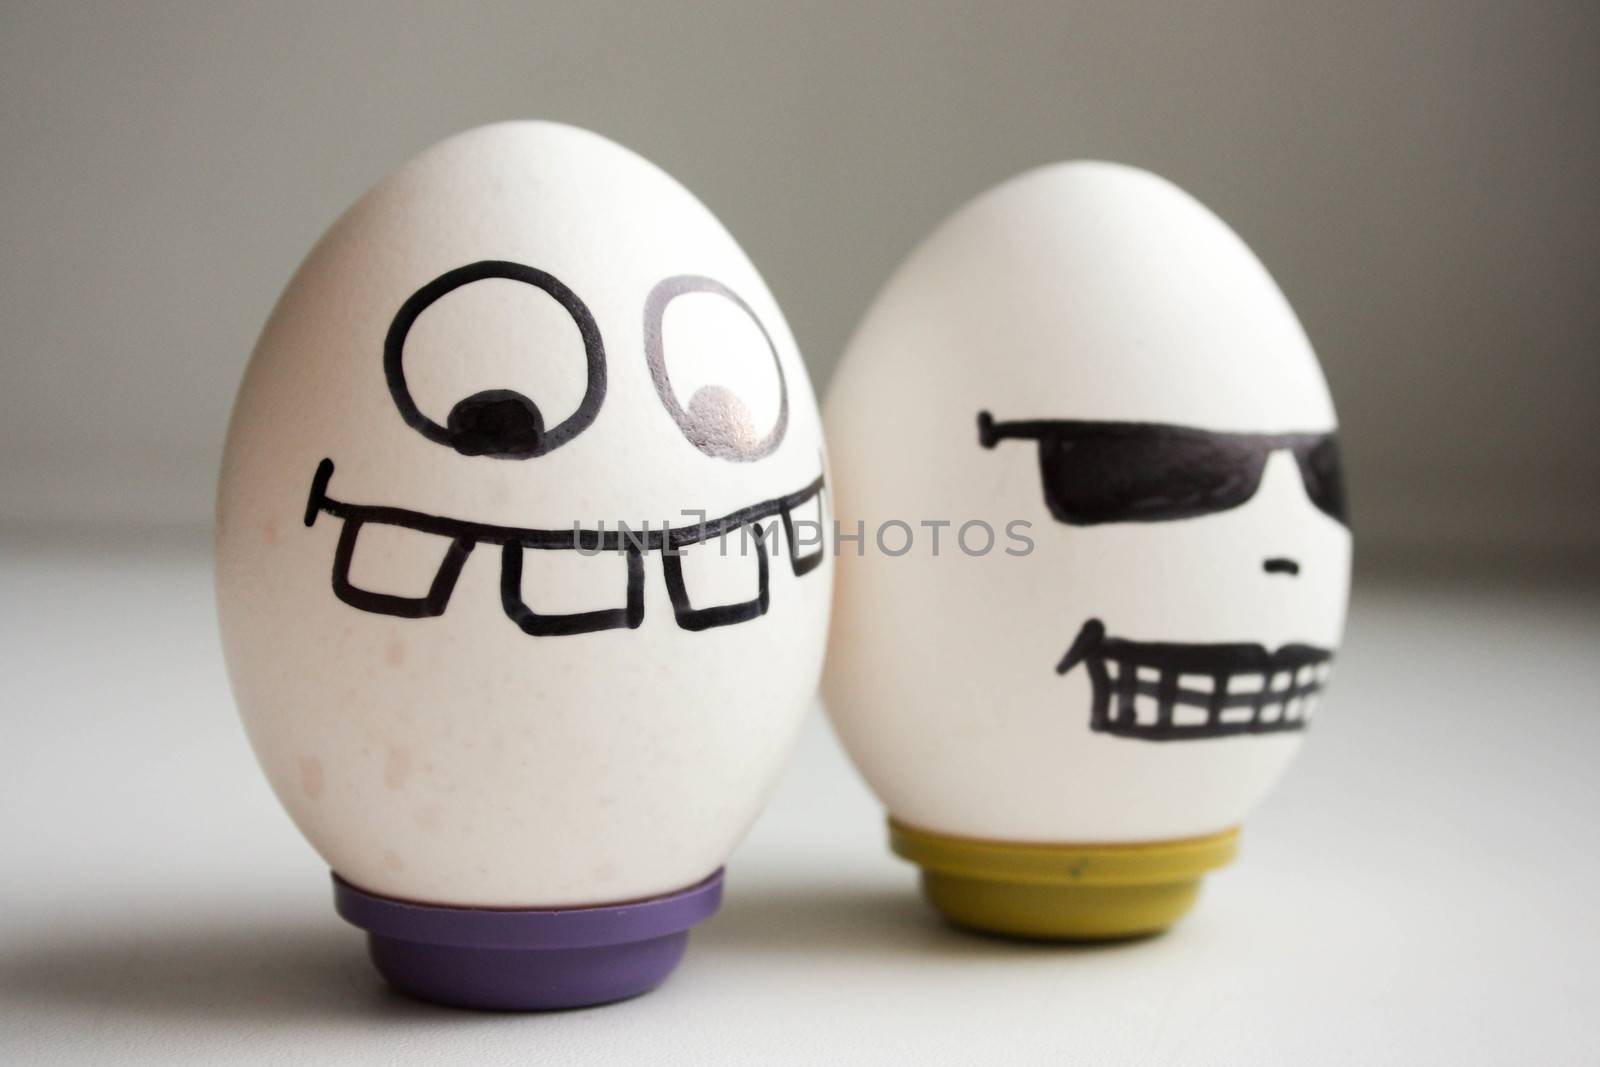 Cheerful eggs. cool with glasses by xenium